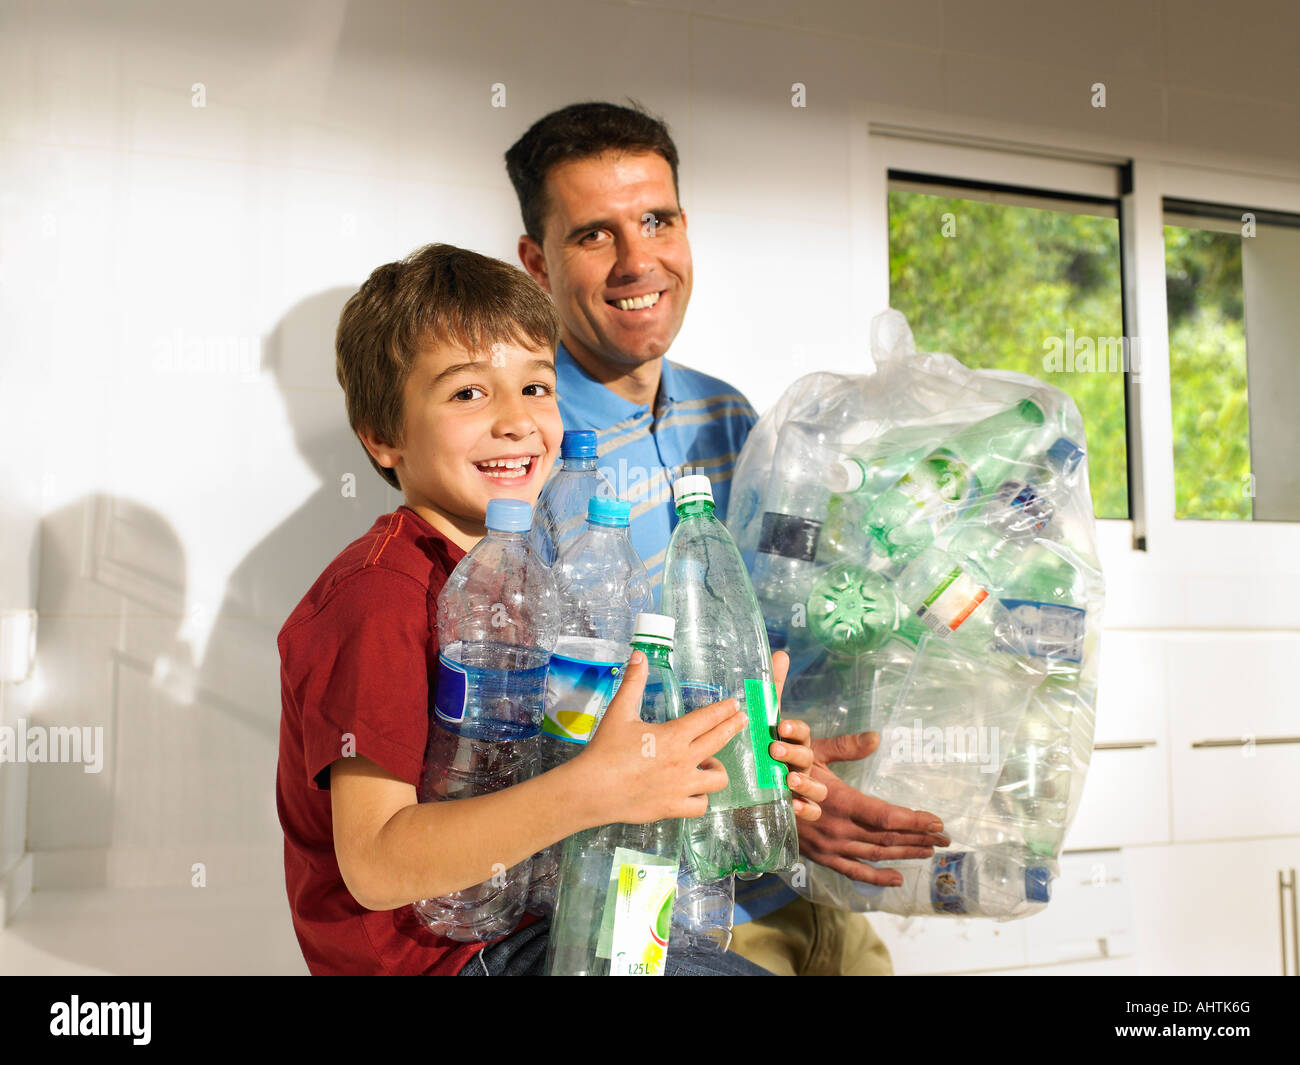 Father and son (6-8) recycling plastic bottles, smiling Stock